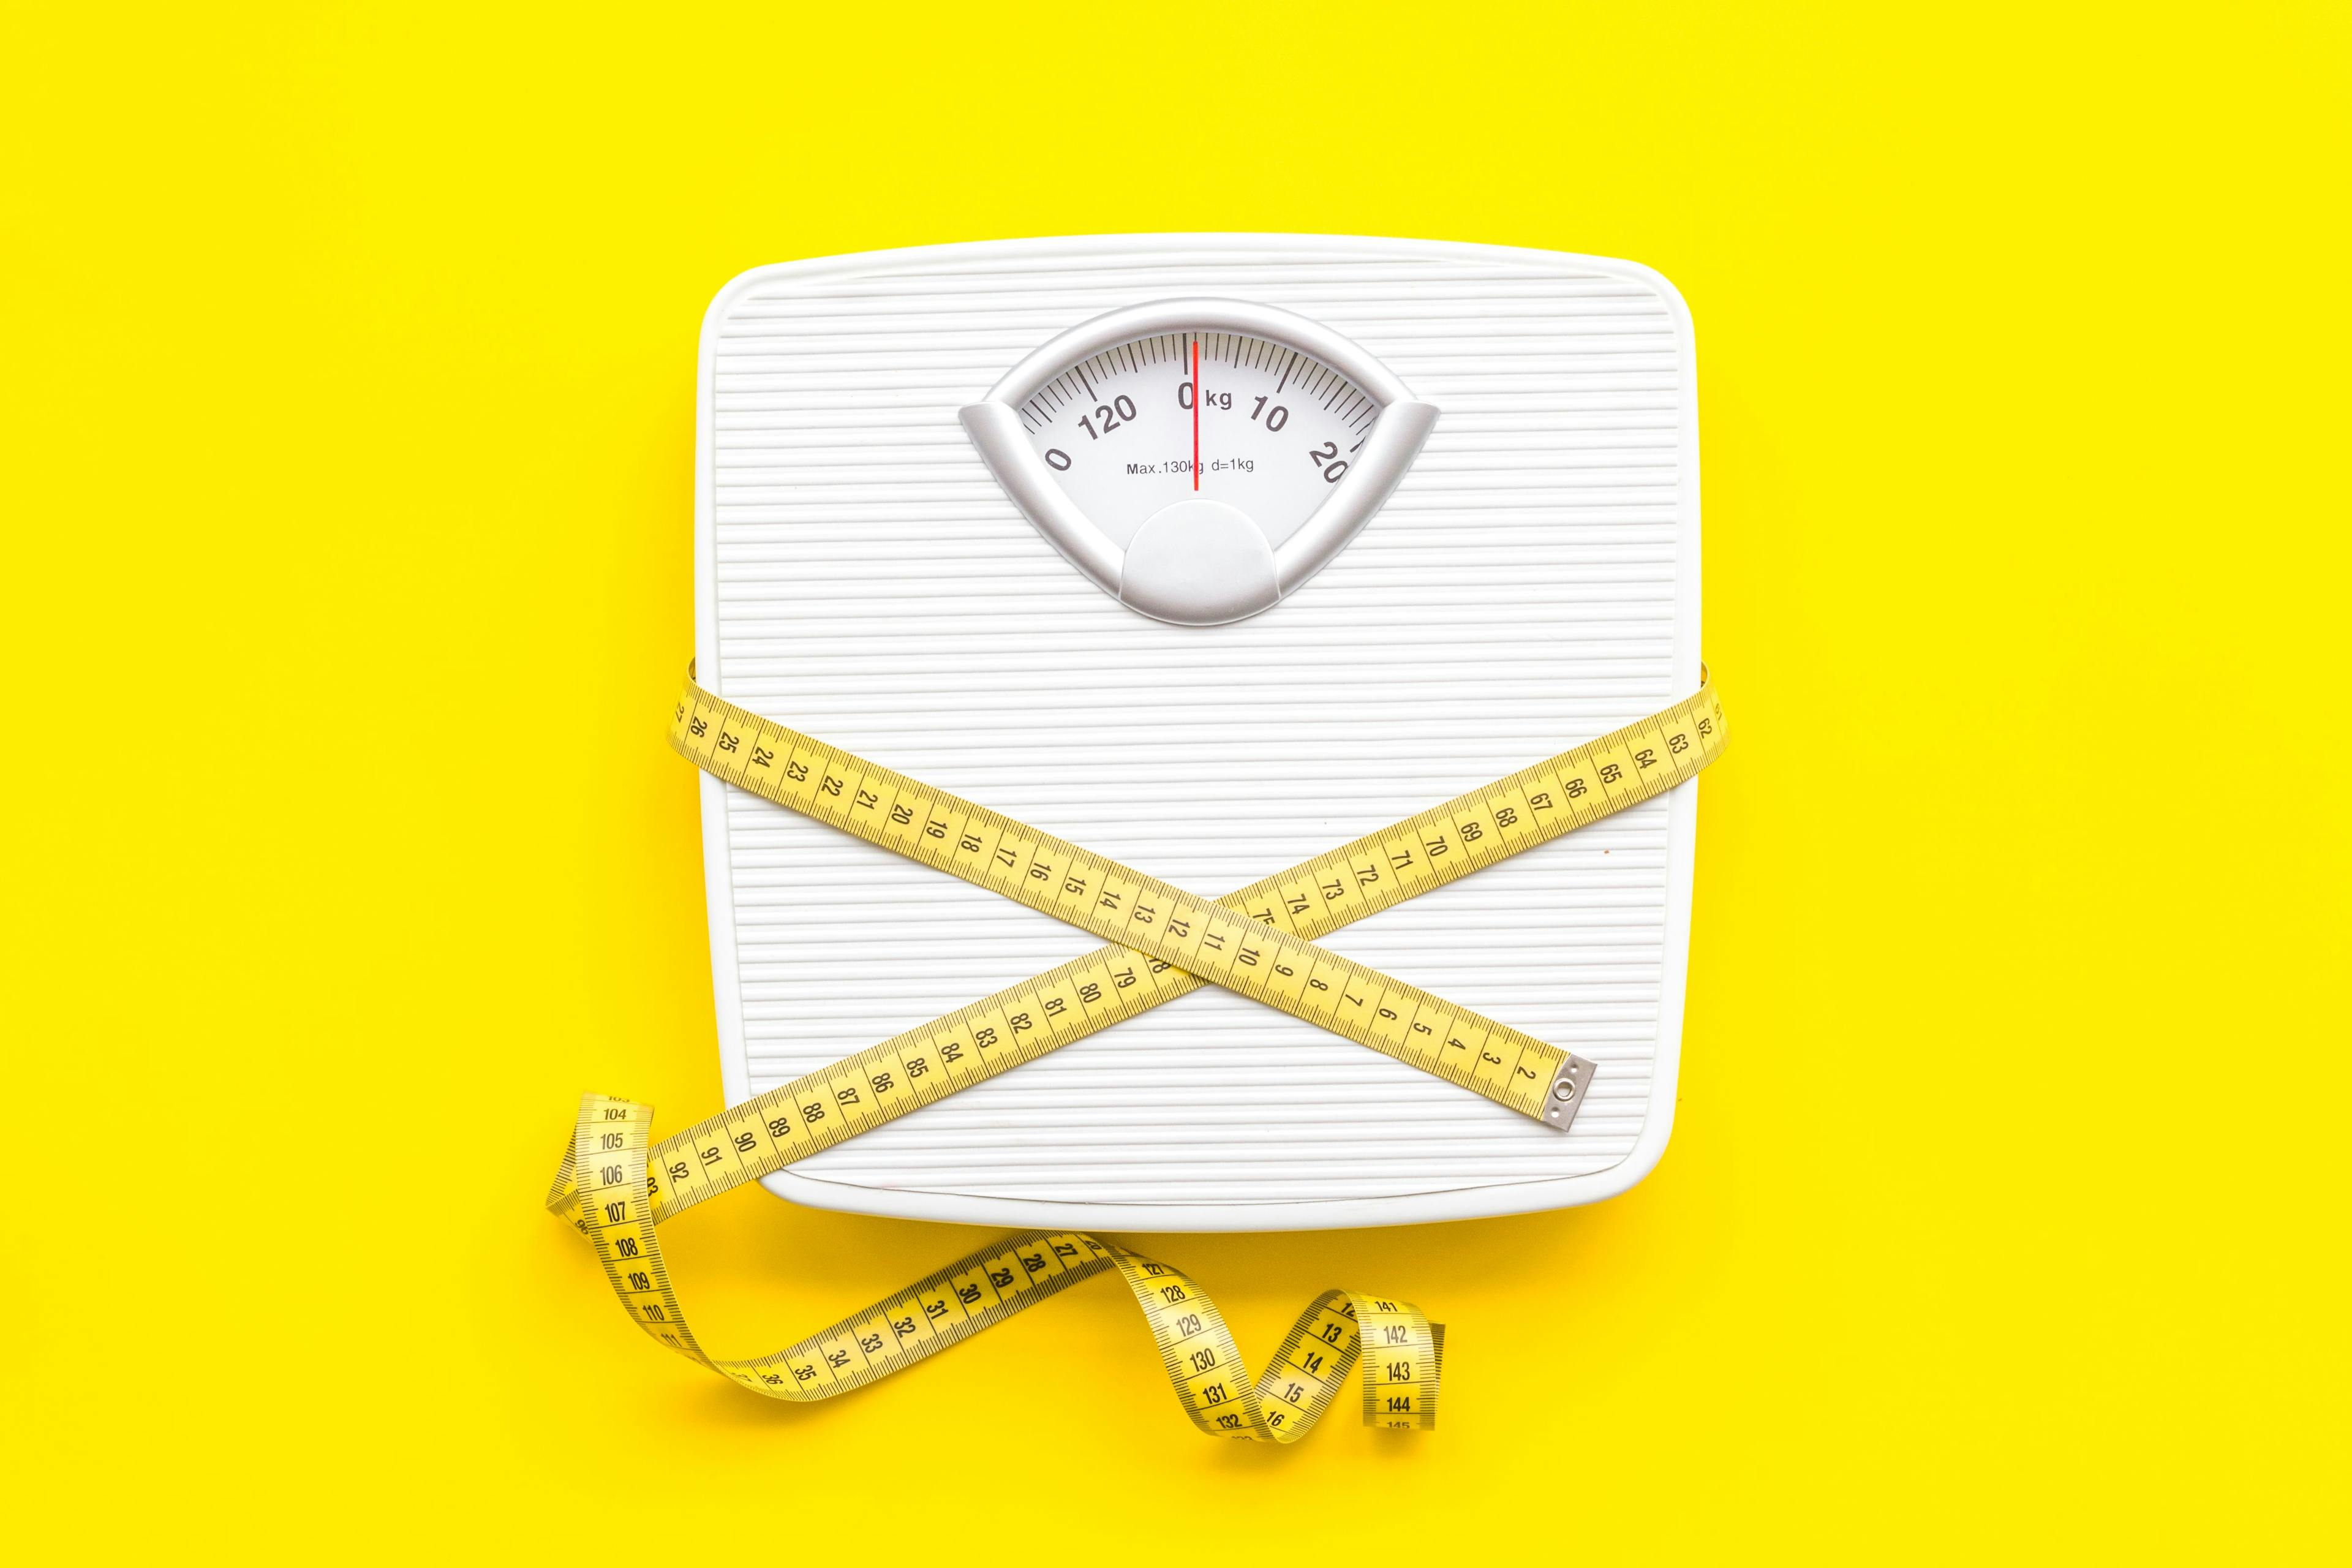 Lose Weight, Gain Health: How Pharmacy-Based Weight Loss Programs Can Fight the Obesity Epidemic